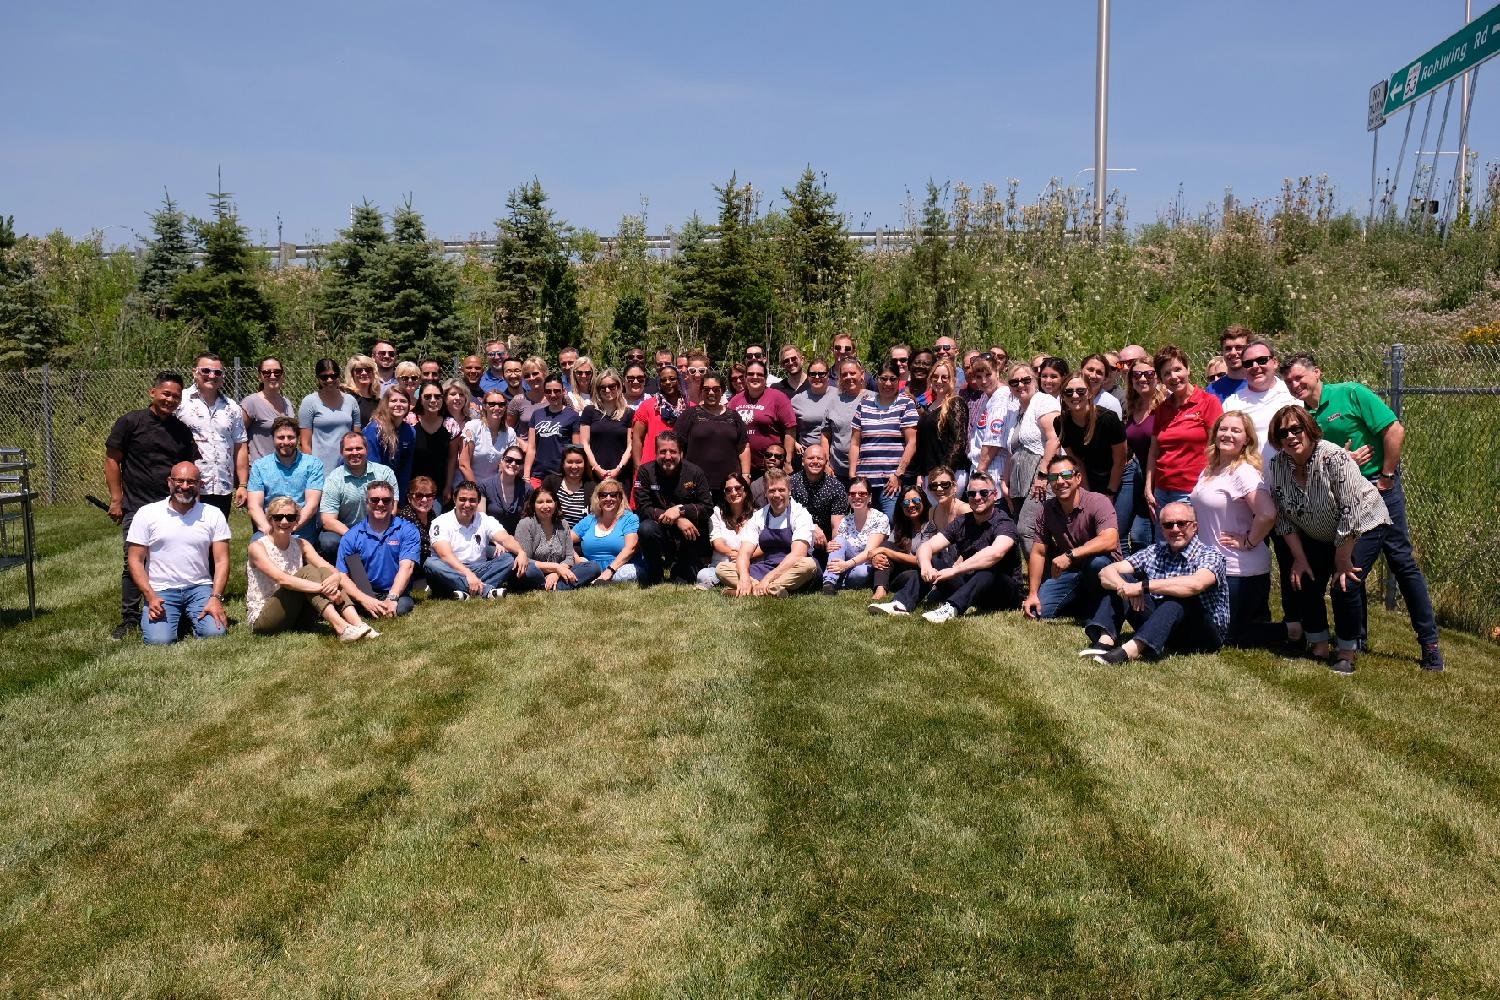 Our last All Associate Team Building event, an outdoor cooking competition.  This event was so much fun.  